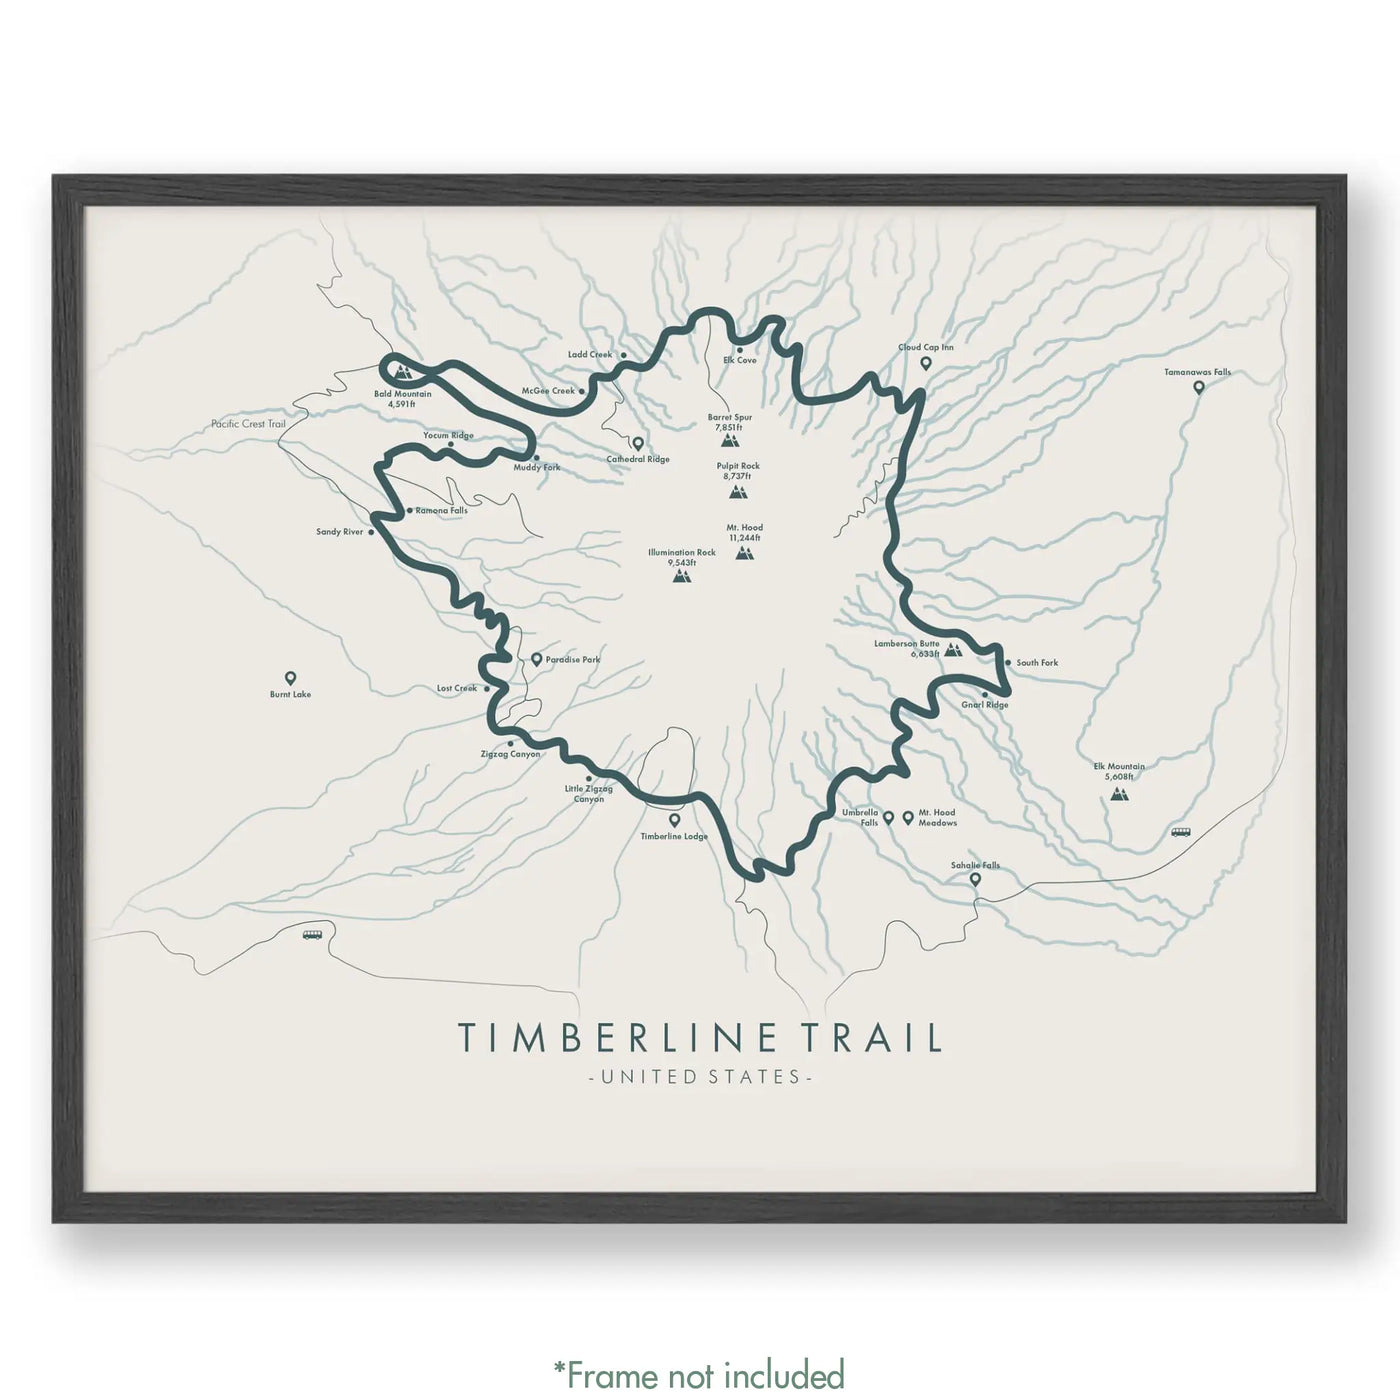 Trail Poster of Timberline Trail - Beige